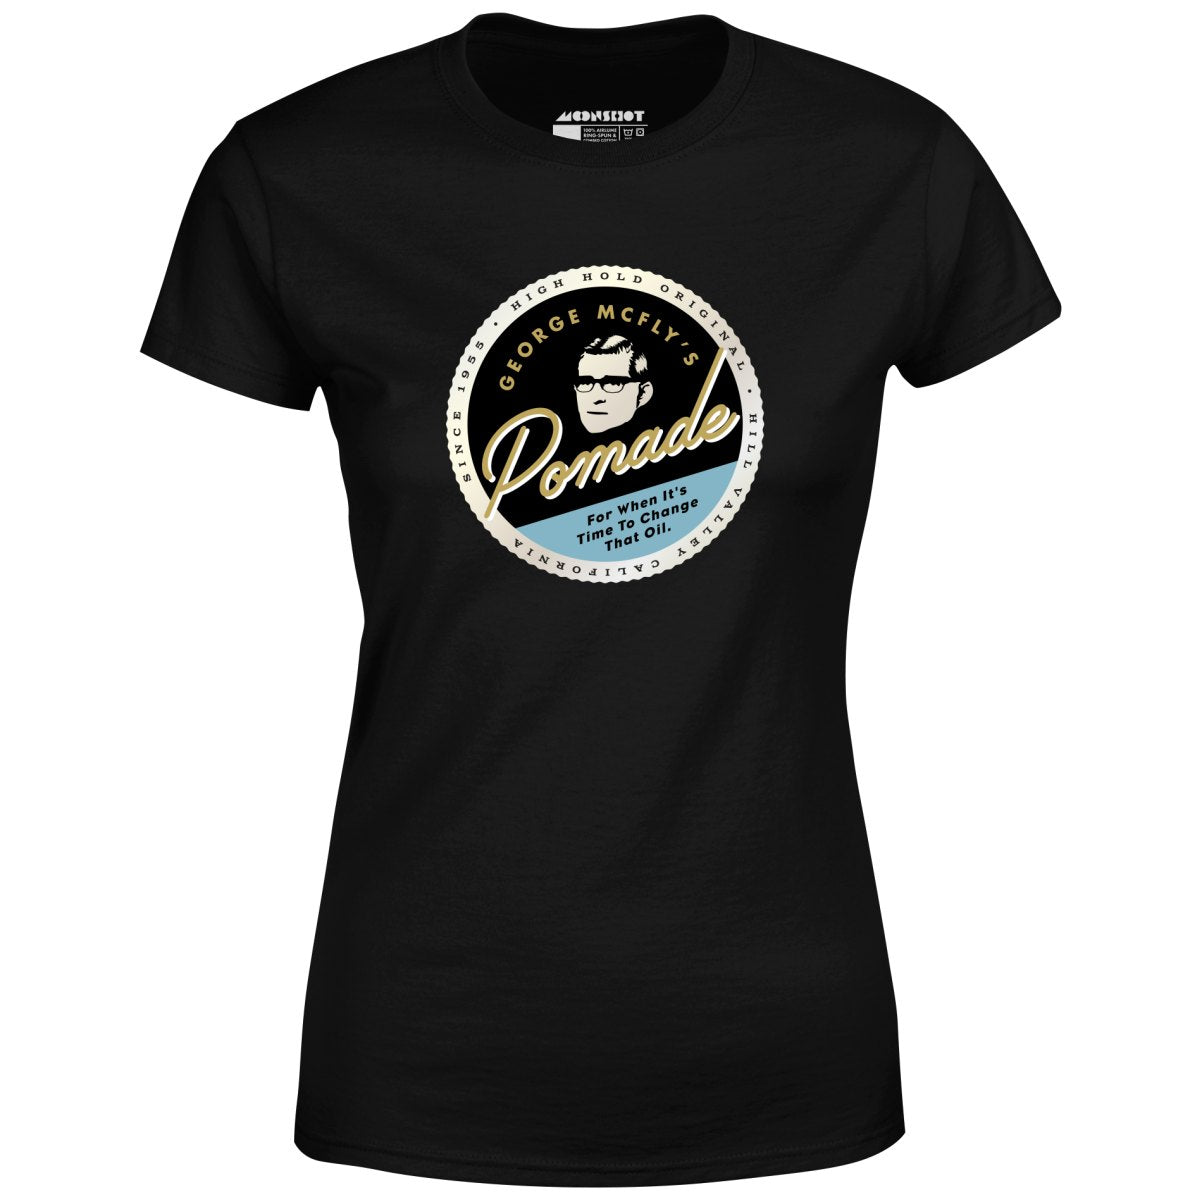 George McFly's Pomade - Women's T-Shirt